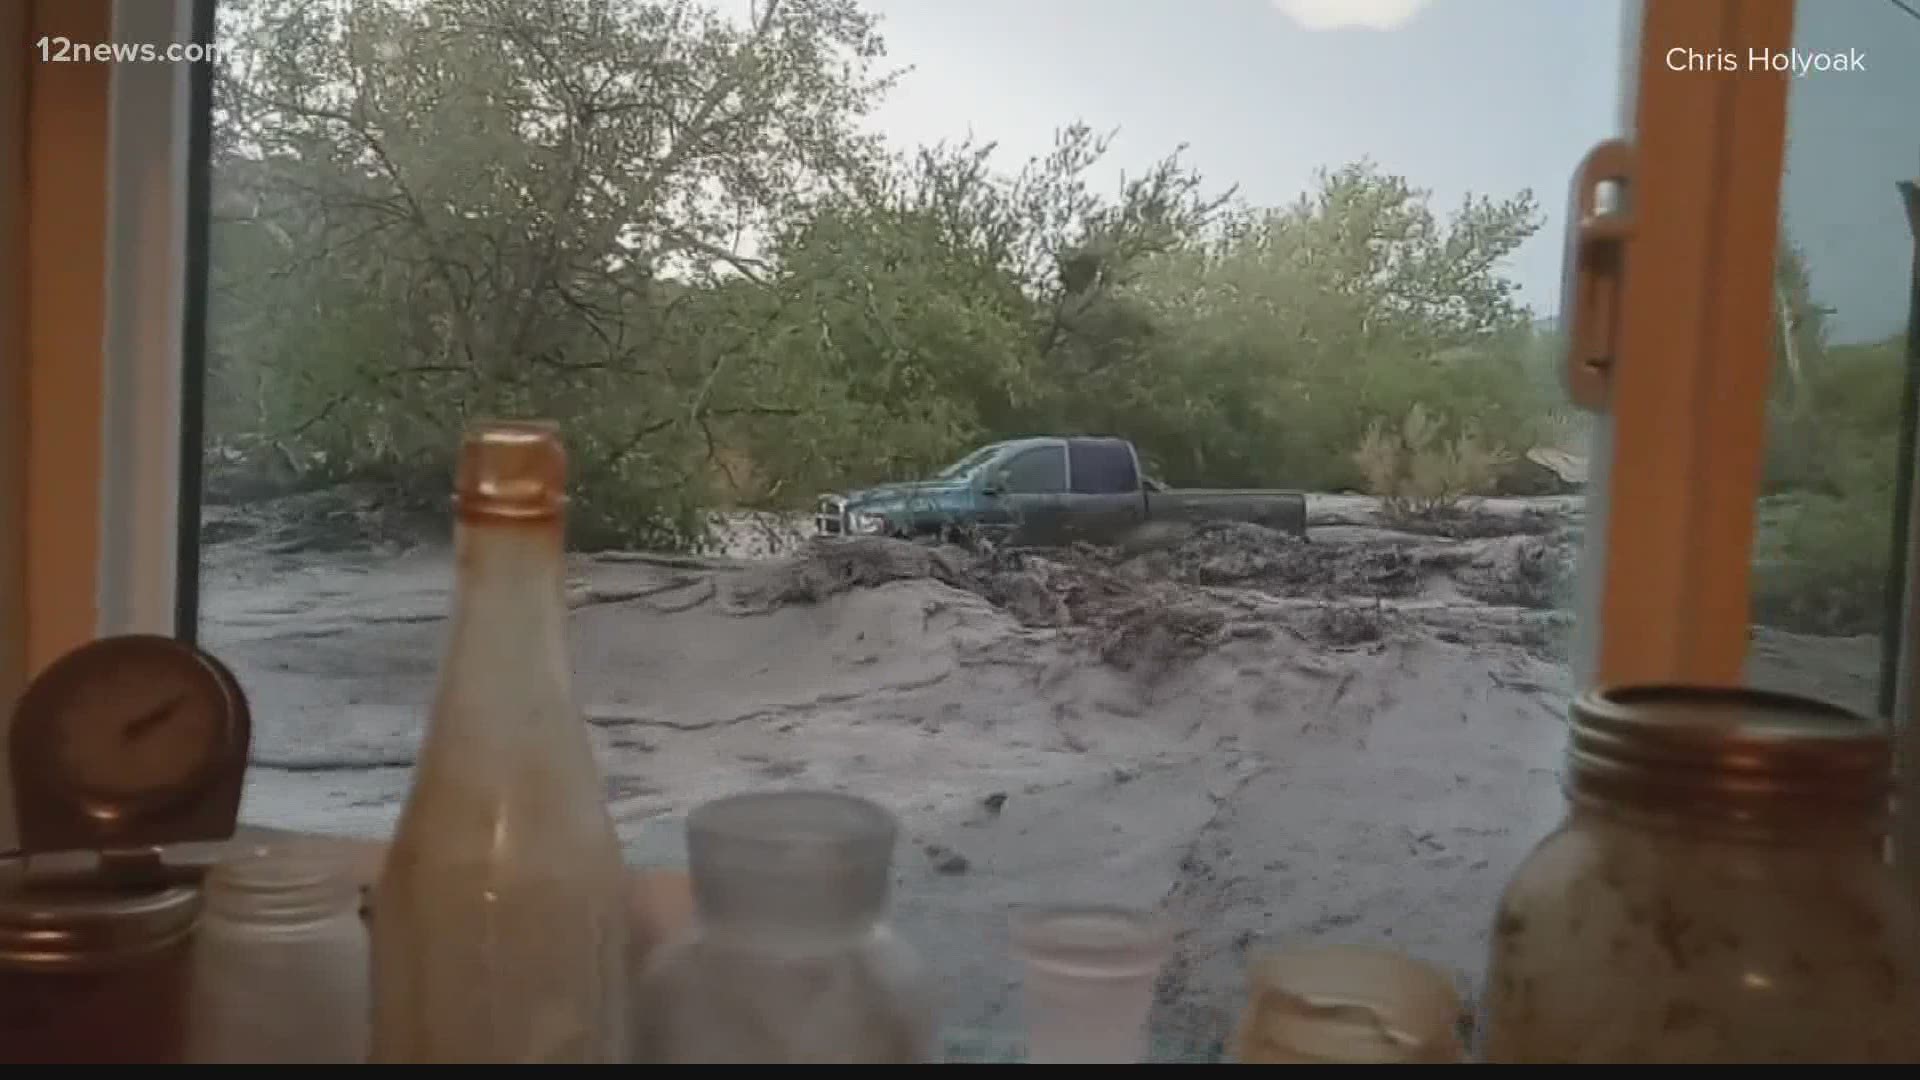 The scary video showed the moments as flash floods swept through the far East Valley over the weekend.